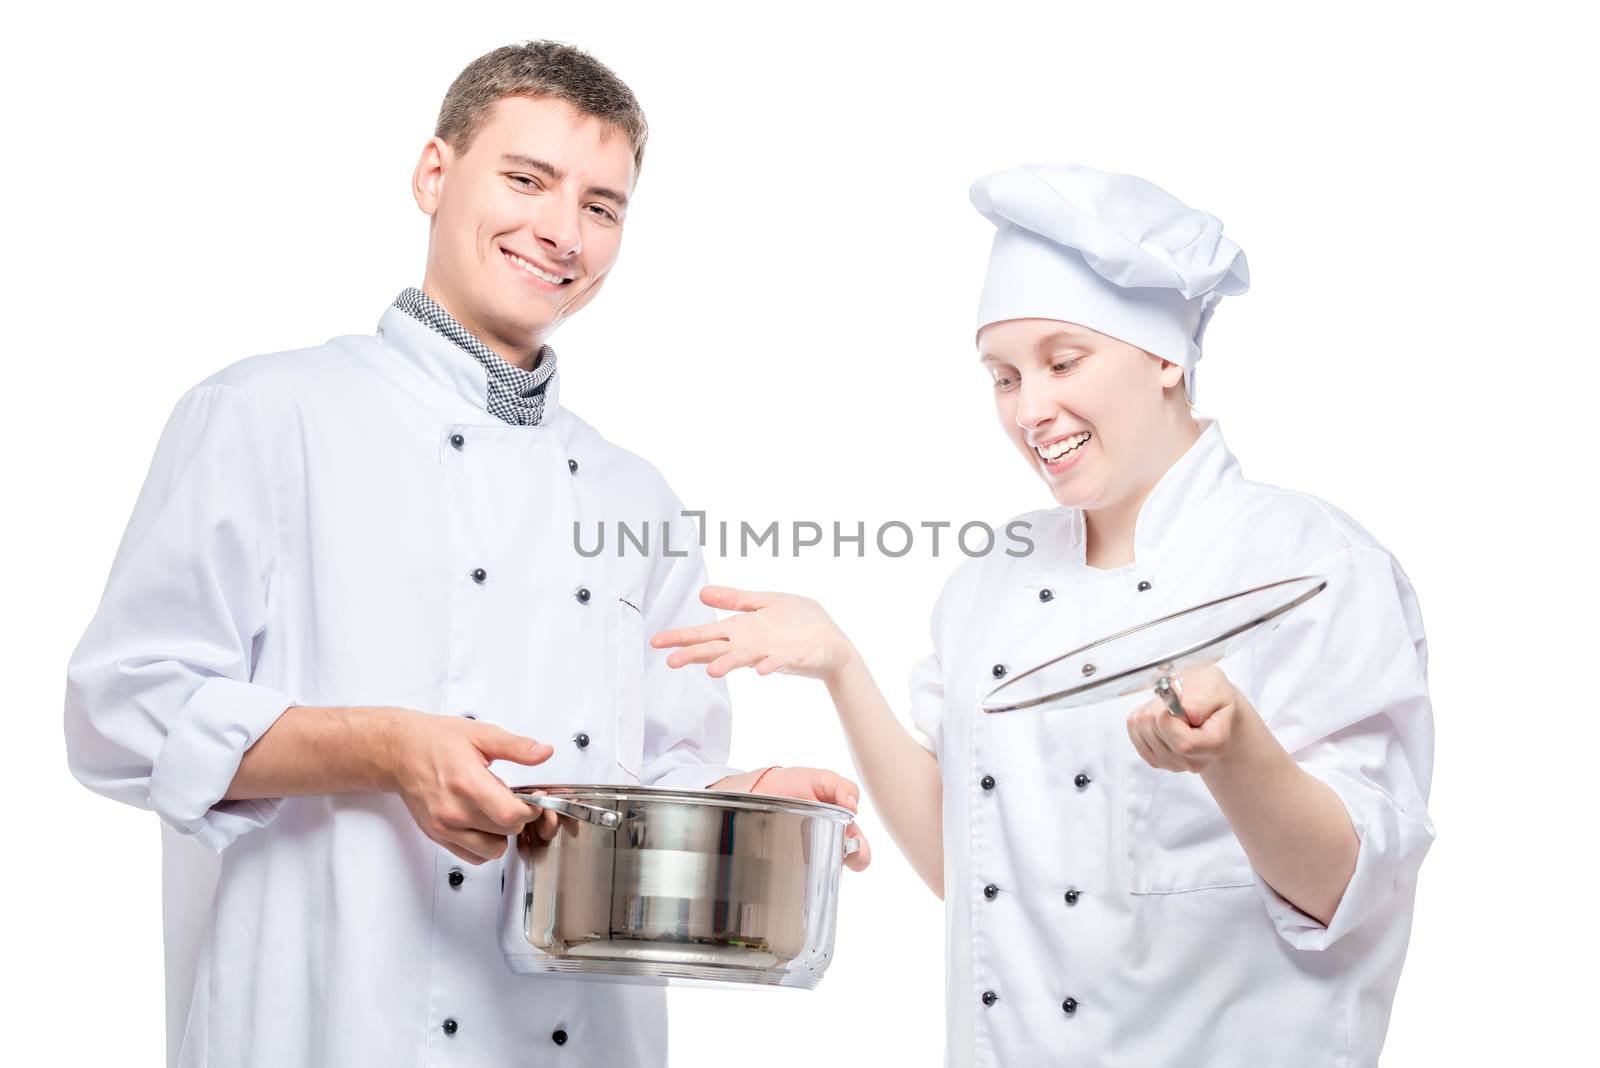 emotions of chefs portrait with a pan of soup on a white background